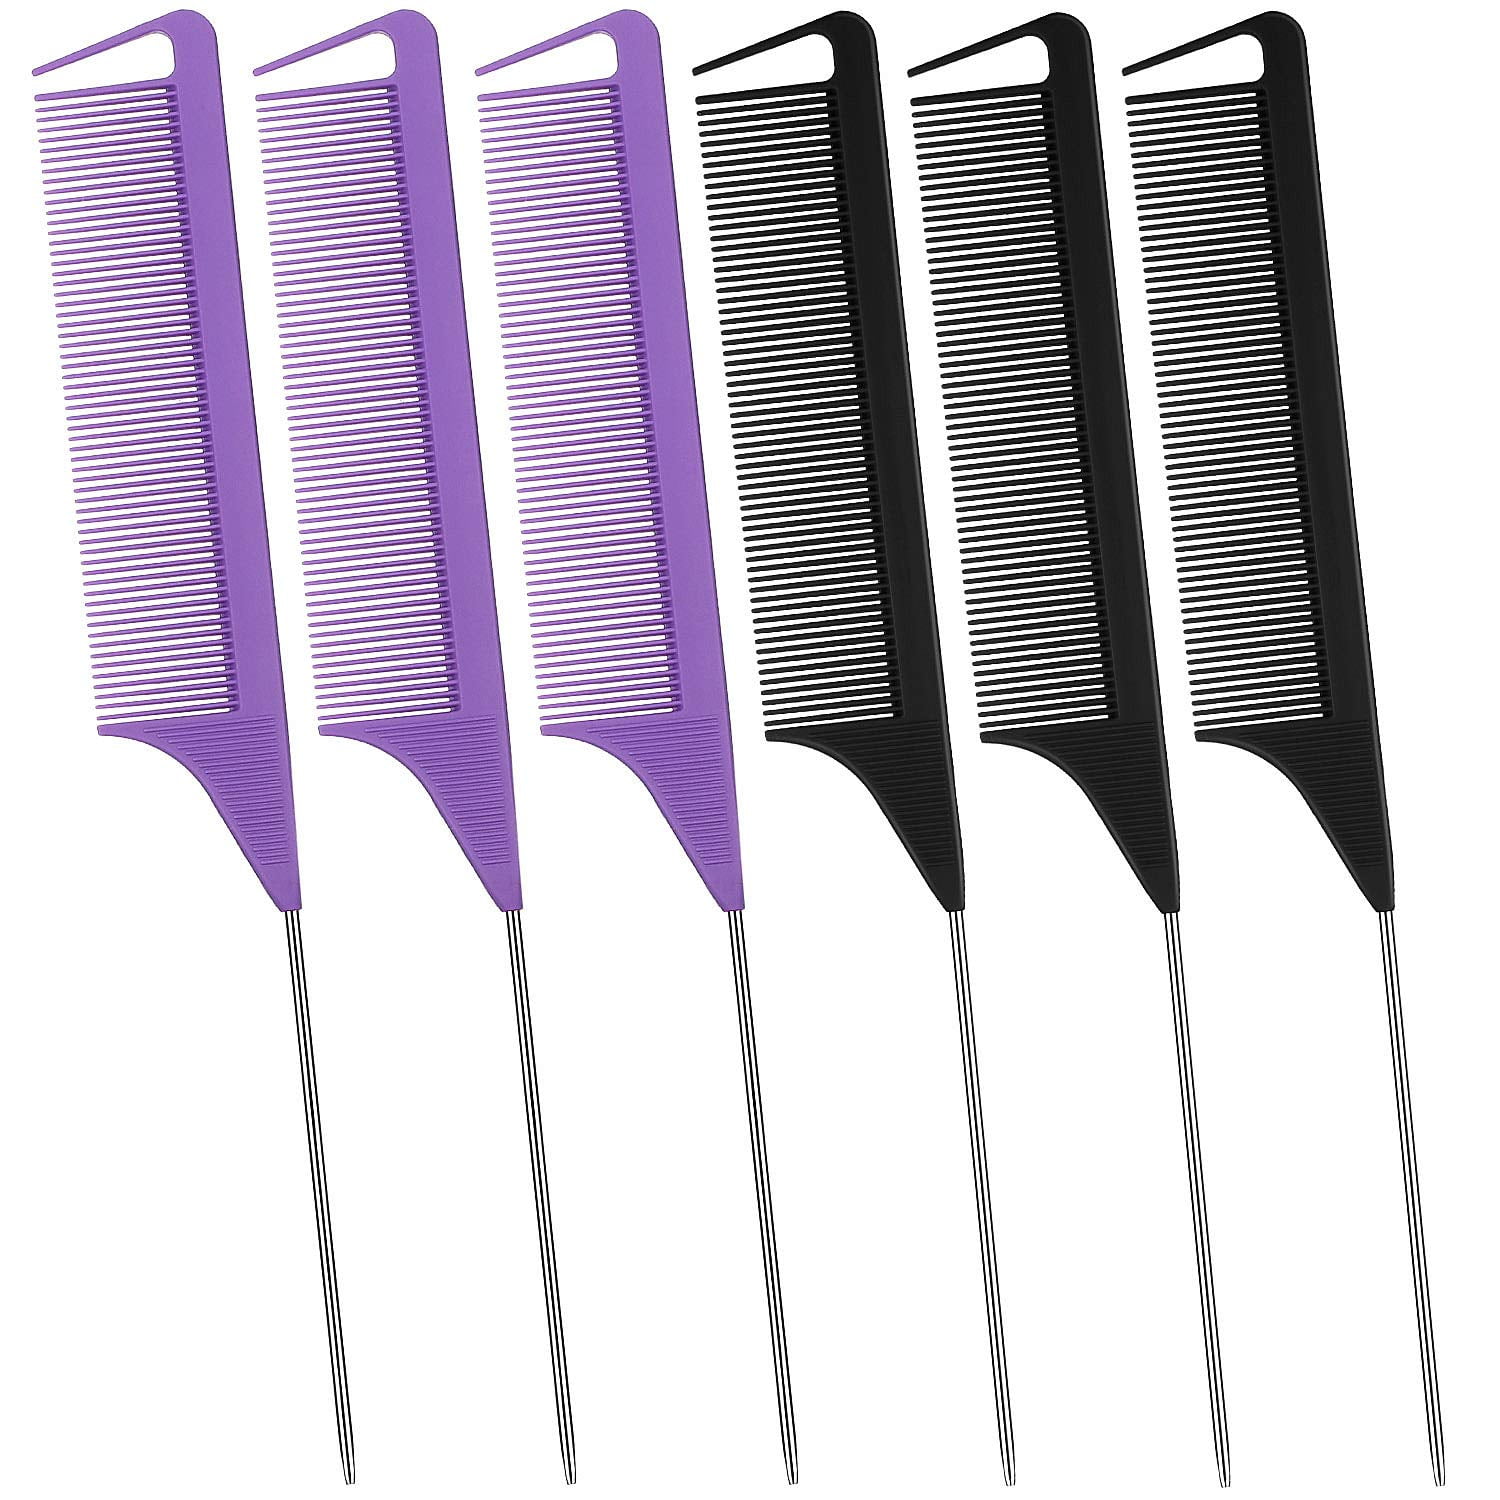 LLTGMV 9.3'' Rat Tail Combs for Hair Stylist, Parting Combs for Braiding  hair, Rattail Comb with Metal Stainless Steel Pintail for Sectioning